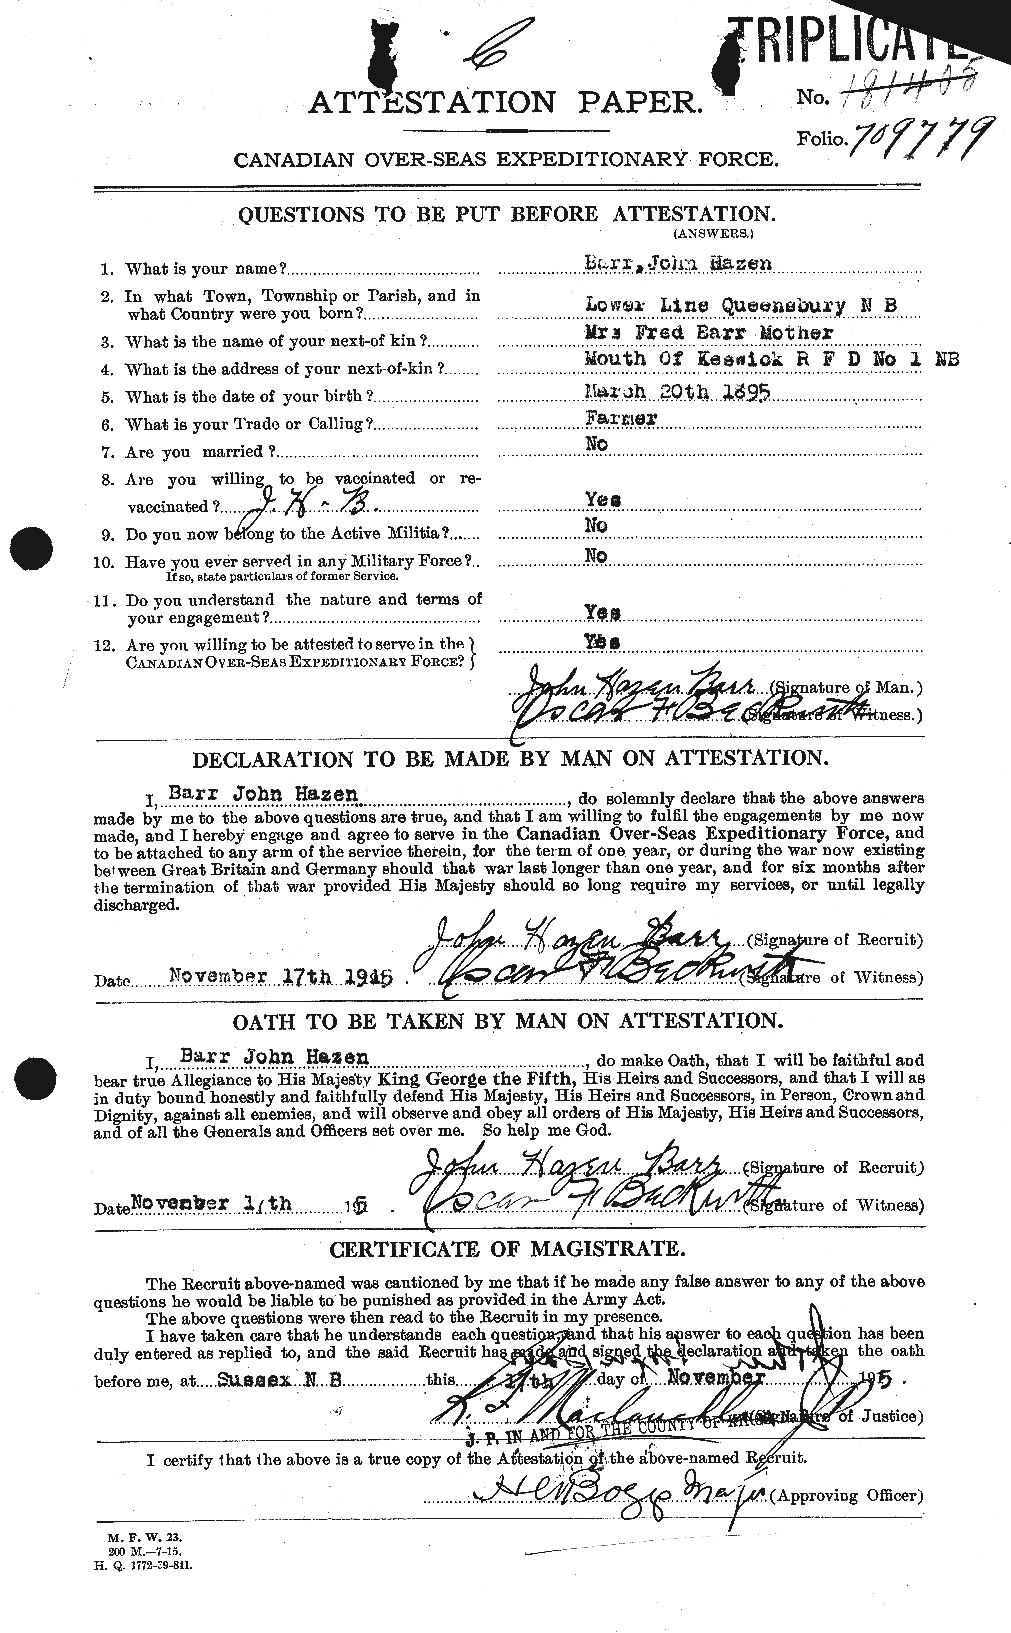 Personnel Records of the First World War - CEF 227863a